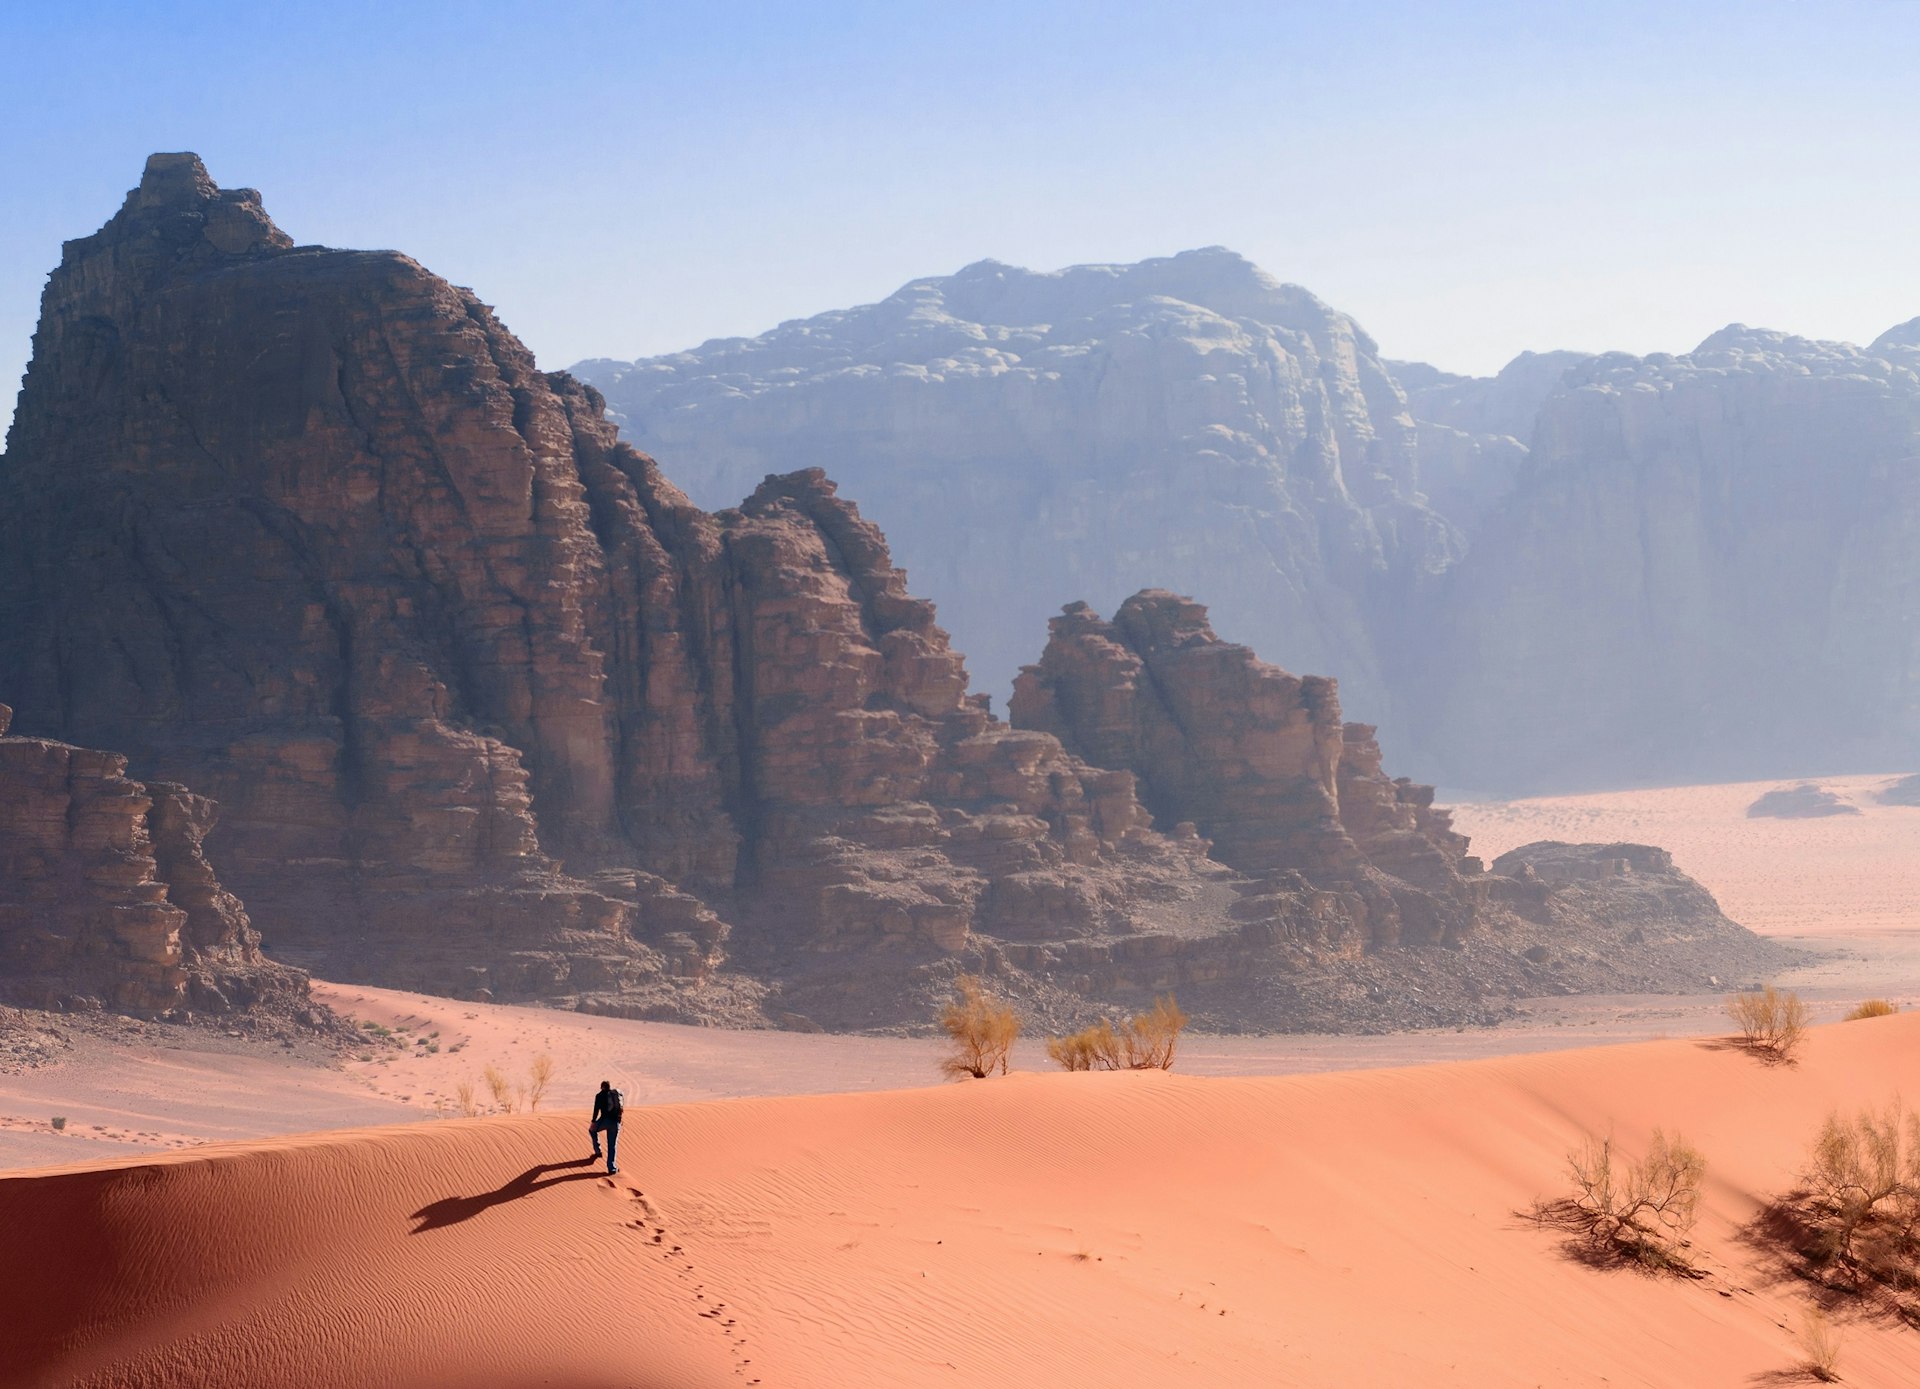 A person hikes up a red sand dune, with the most stunning backdrop in the distance; two sets of towering rocky mountains stand one in front of the other.